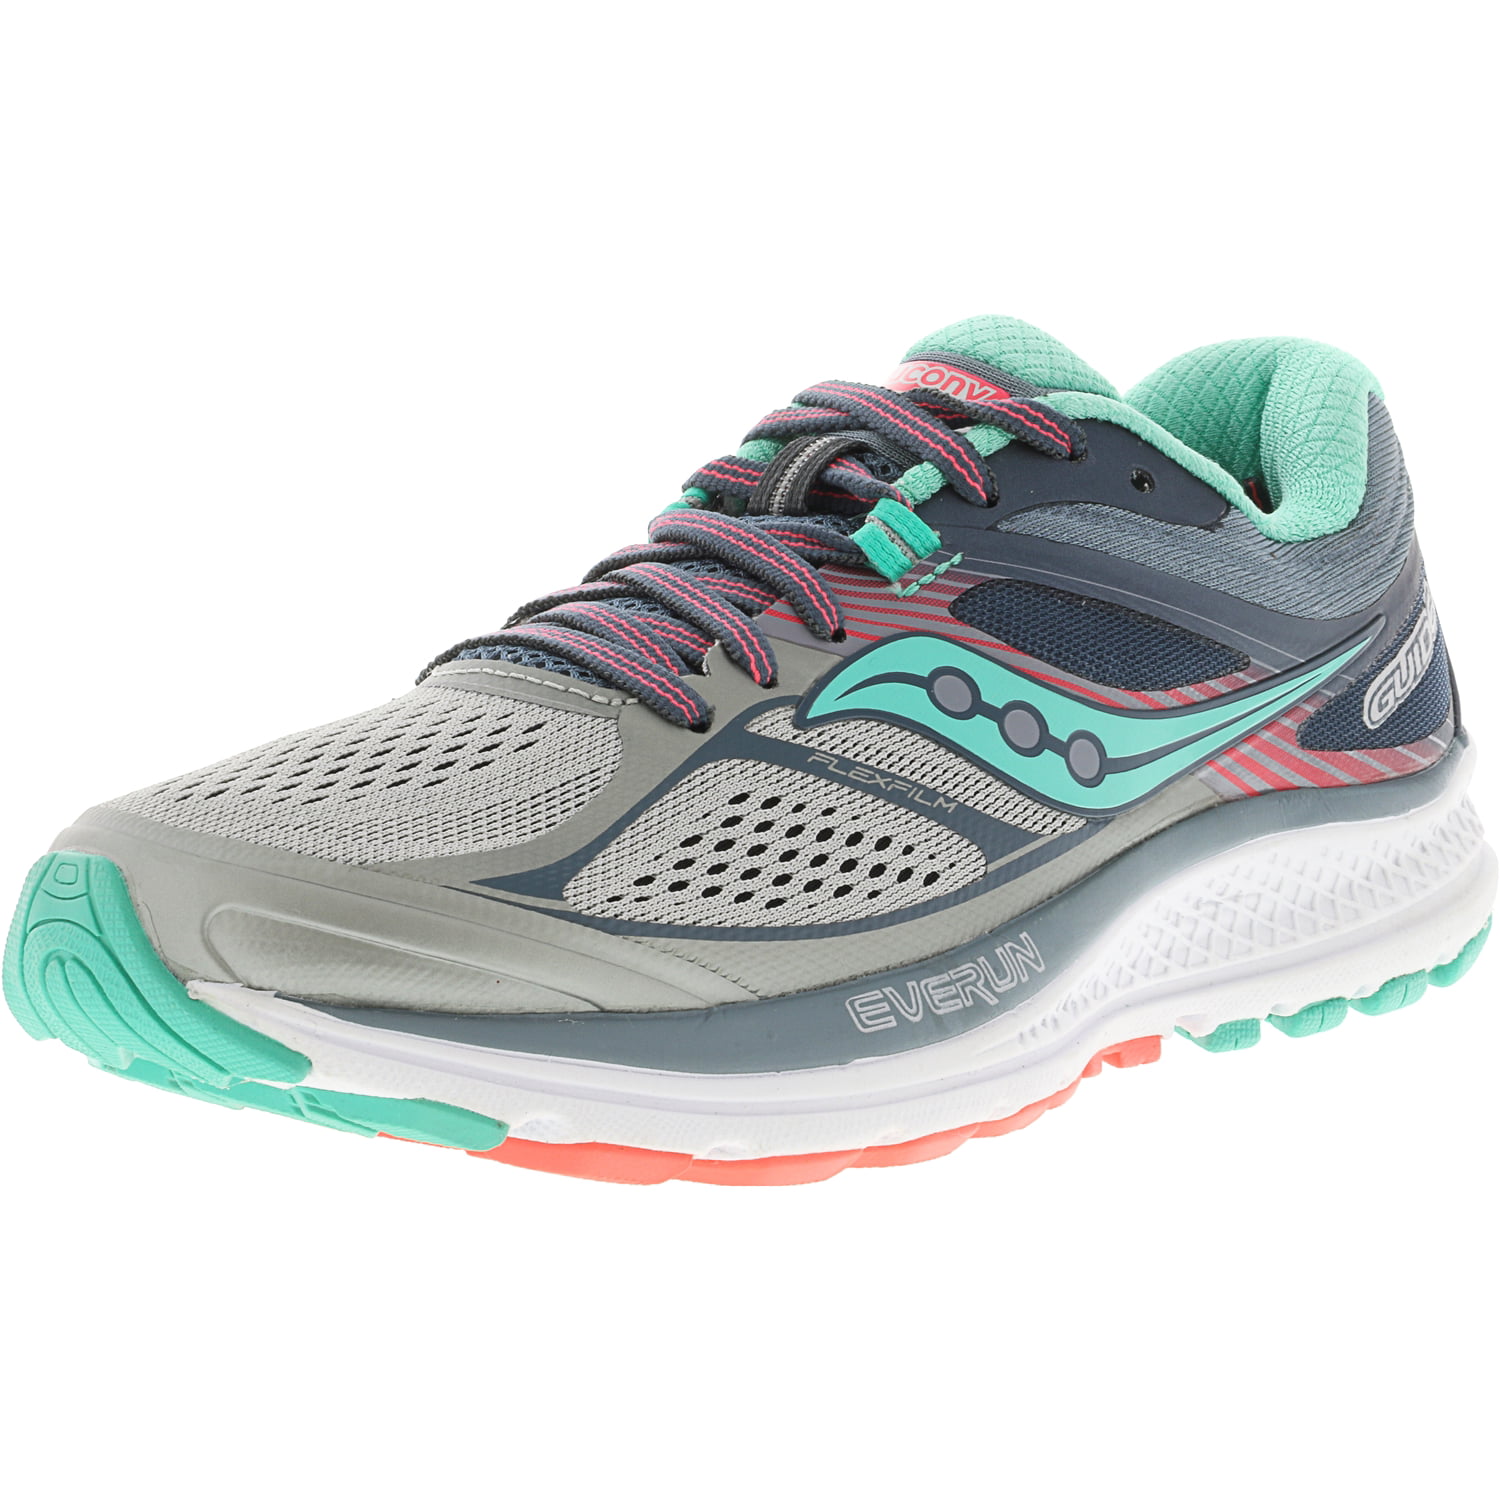 saucony guide 10 womens size 7.5